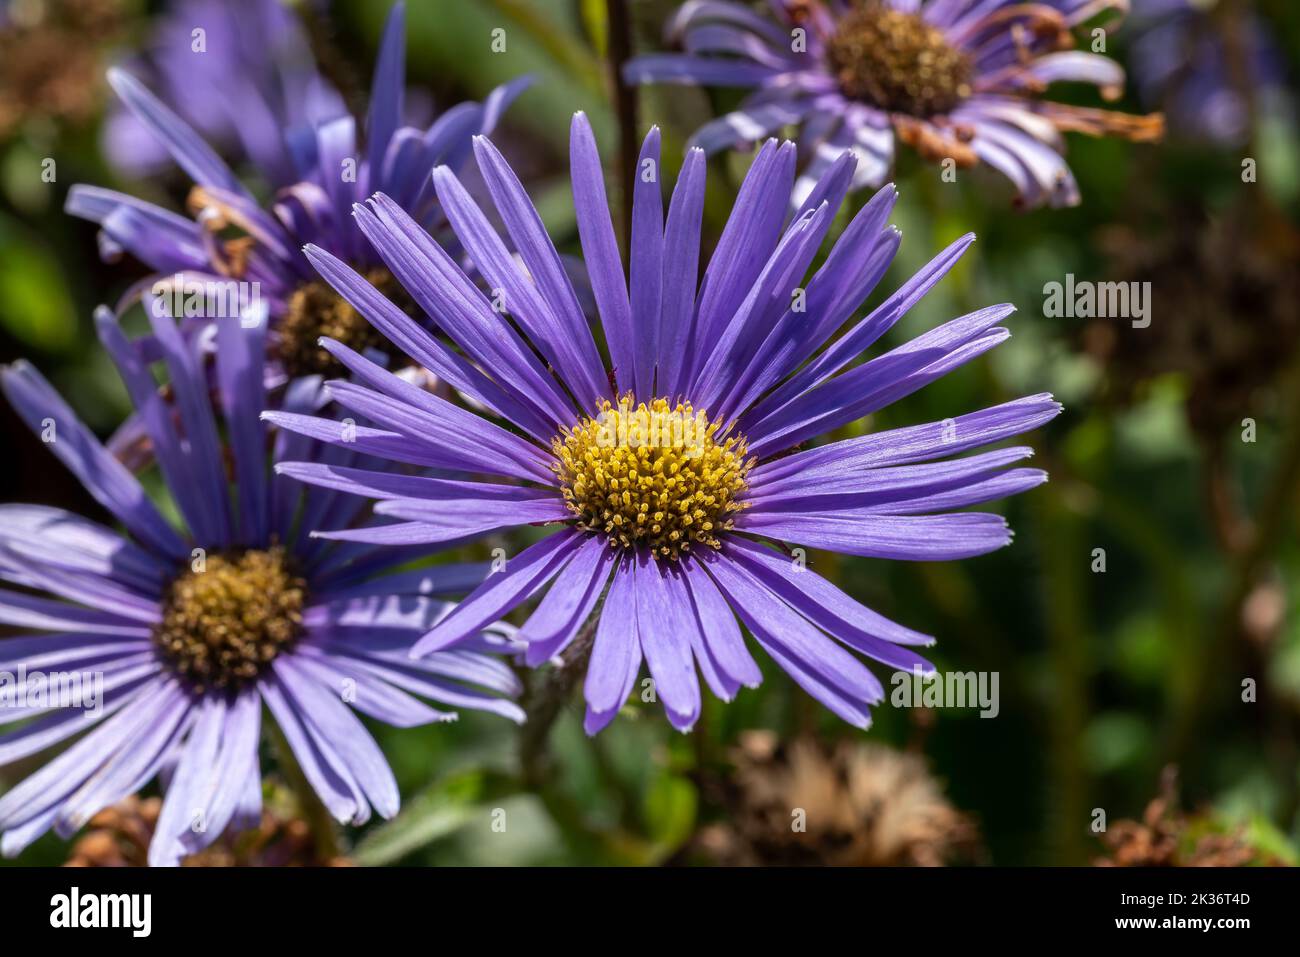 Aster peduncularis a purple blue herbaceous summer autumn perennial flower plant commonly known as Michaelmas daisy stock photo image Stock Photo